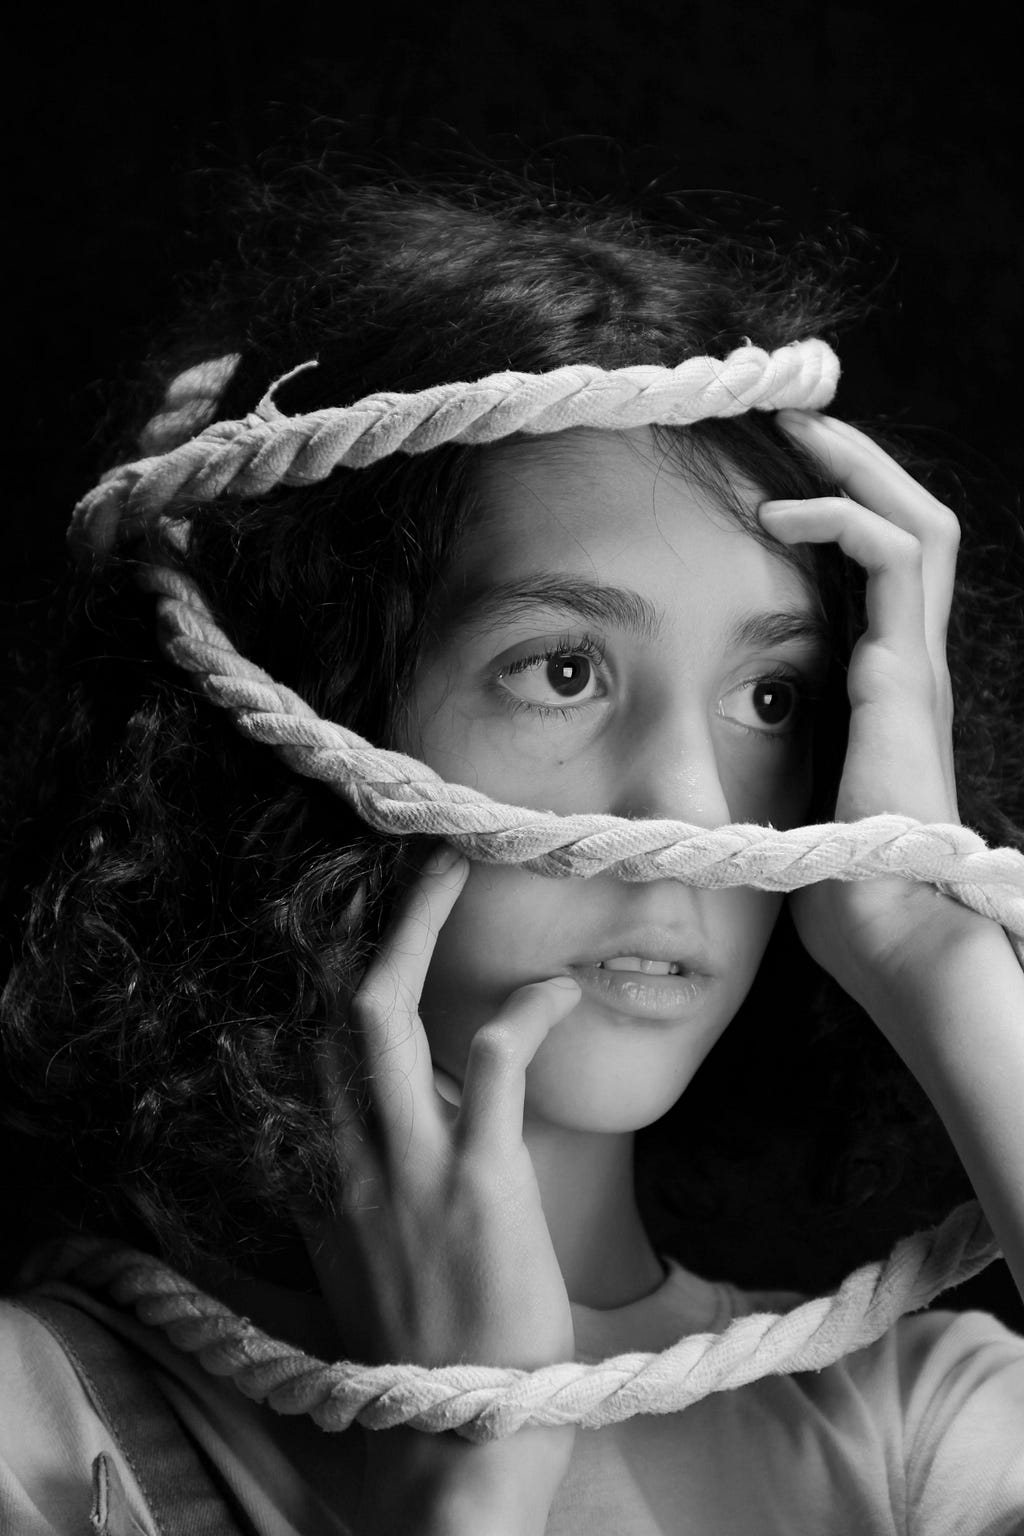 Young girl with rope around her